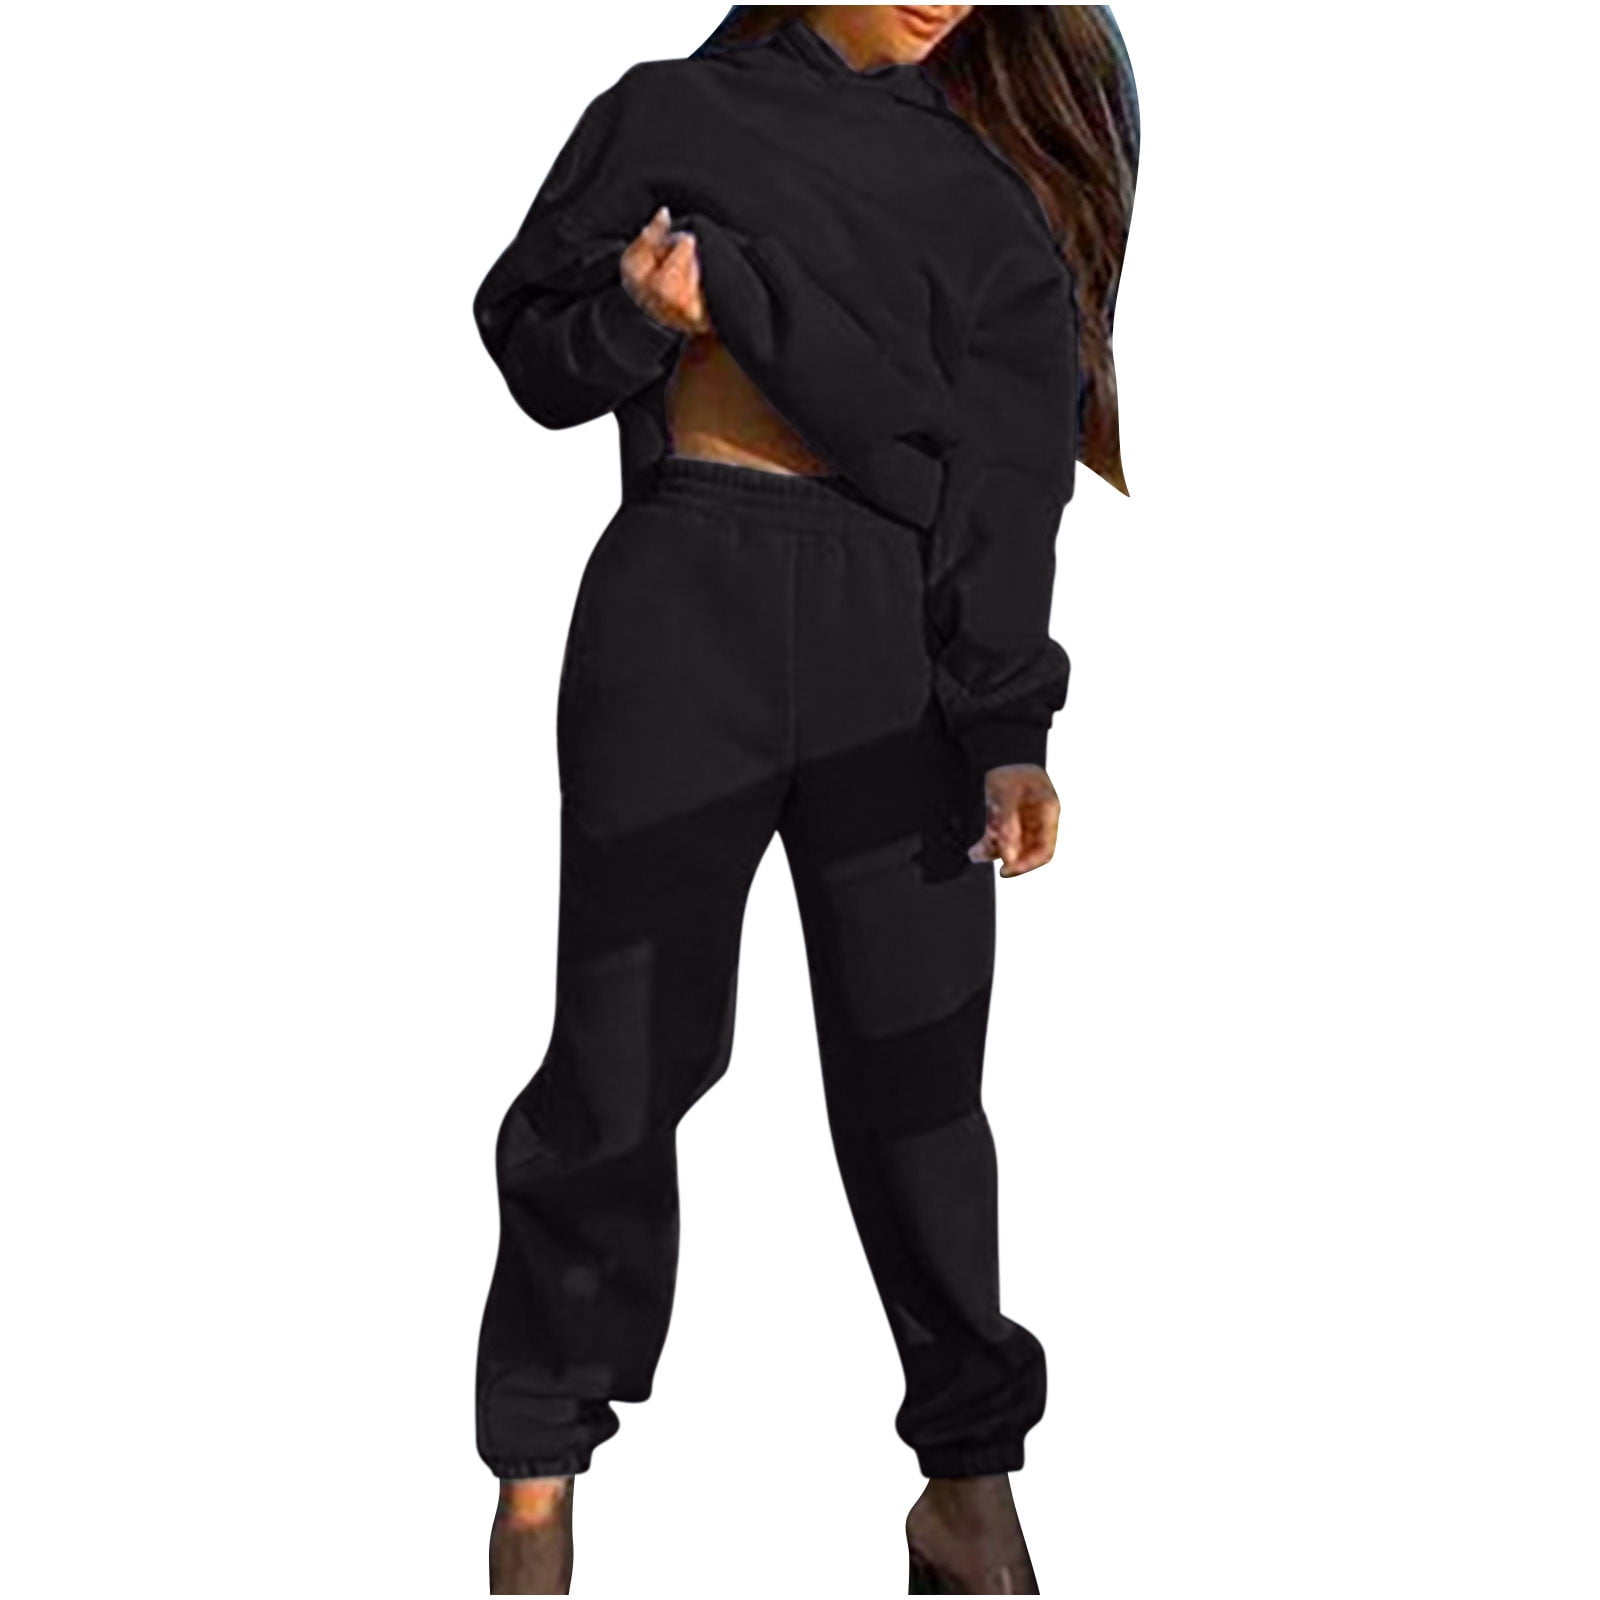 RQYYD Womens Tracksuit Sets 2 Piece Sweatsuits Hoodies Solid Color ...